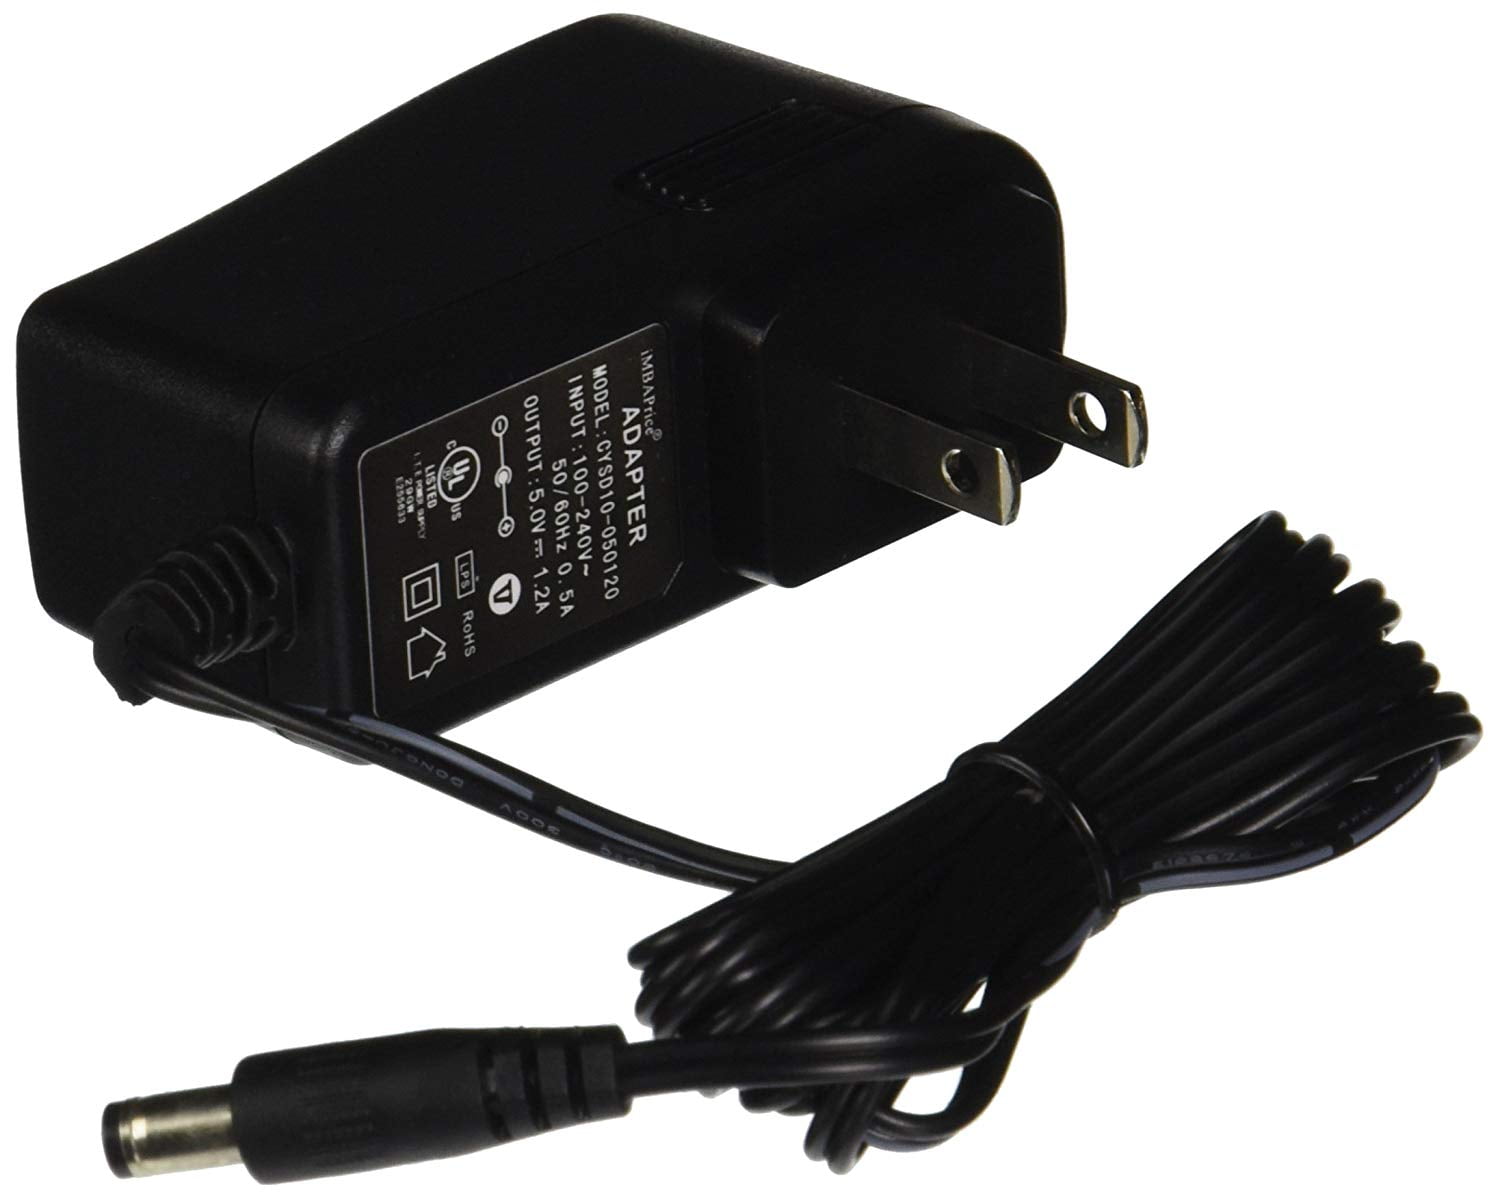 DC5V 2A Power Supply AC100/240V 2.1/5.5mm Plug Replacement Power Supply Adapter 